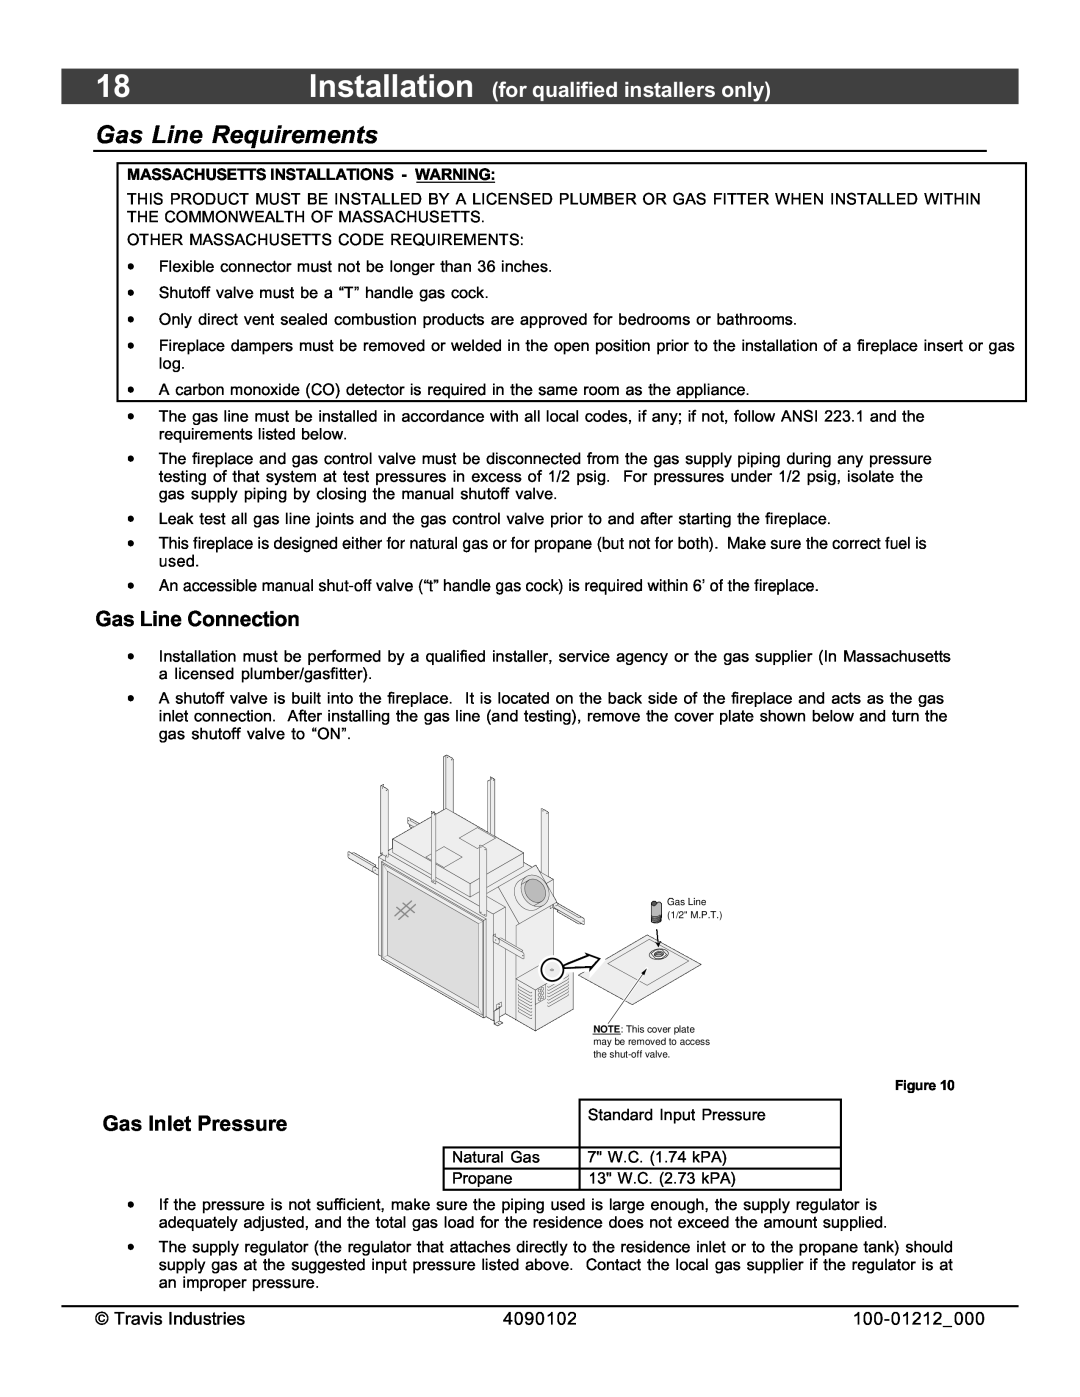 FireplaceXtrordinair 36CF installation manual Gas Line Requirements, Gas Line Connection, Gas Inlet Pressure 